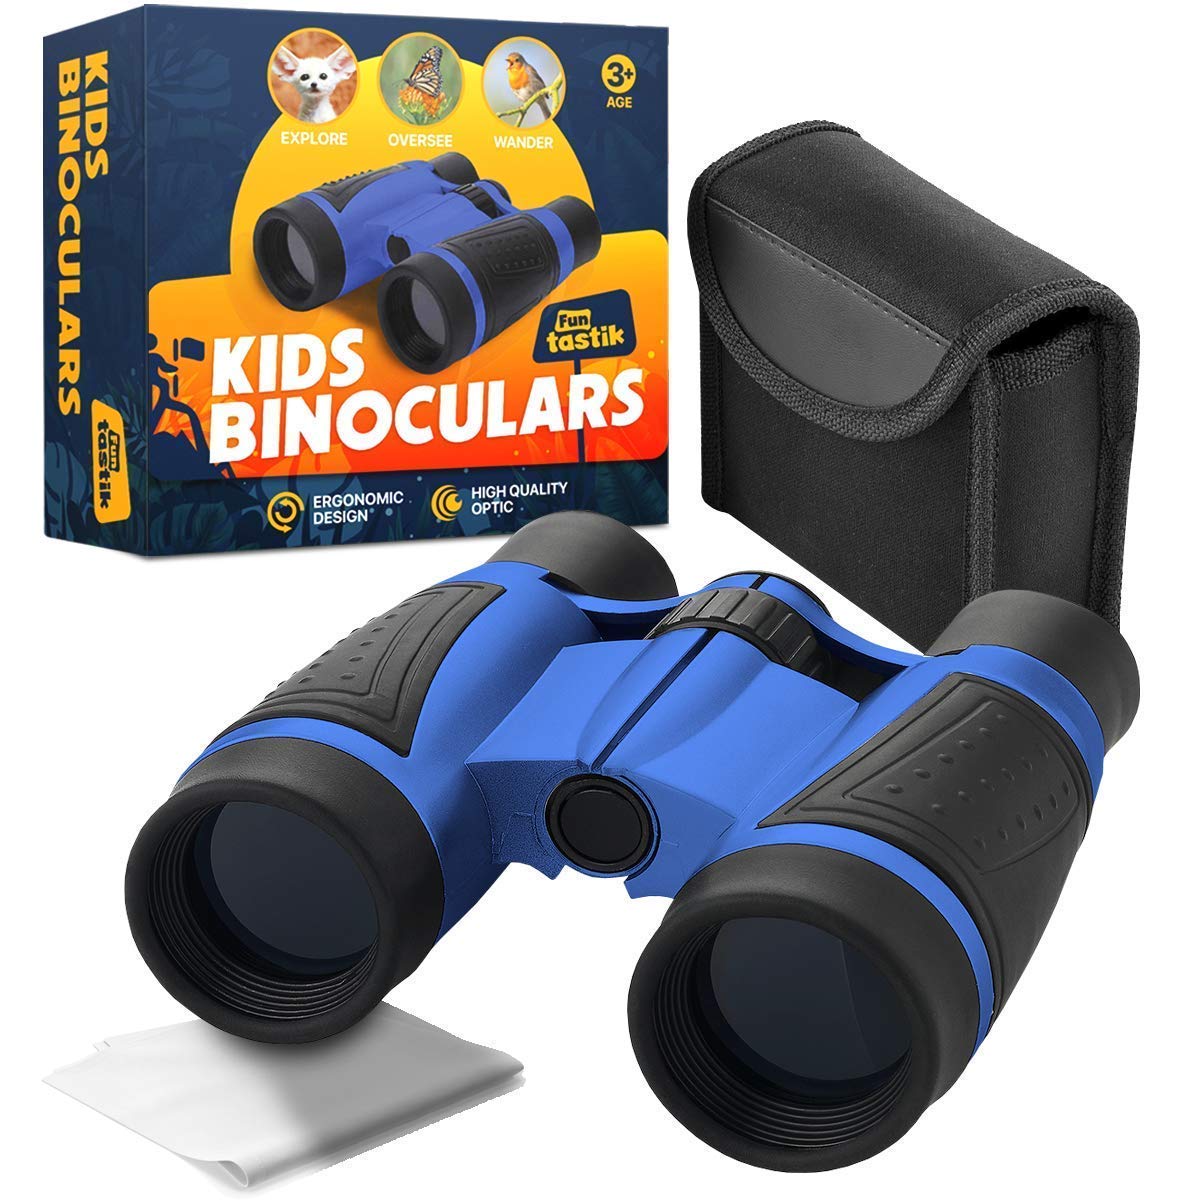 Binoculars for Kids – Compact and Portable – Ergonomic and Shockproof Design – Toddler Presents for Bird Watching and Outdoor Activities - High Definition Magnifying Lenses